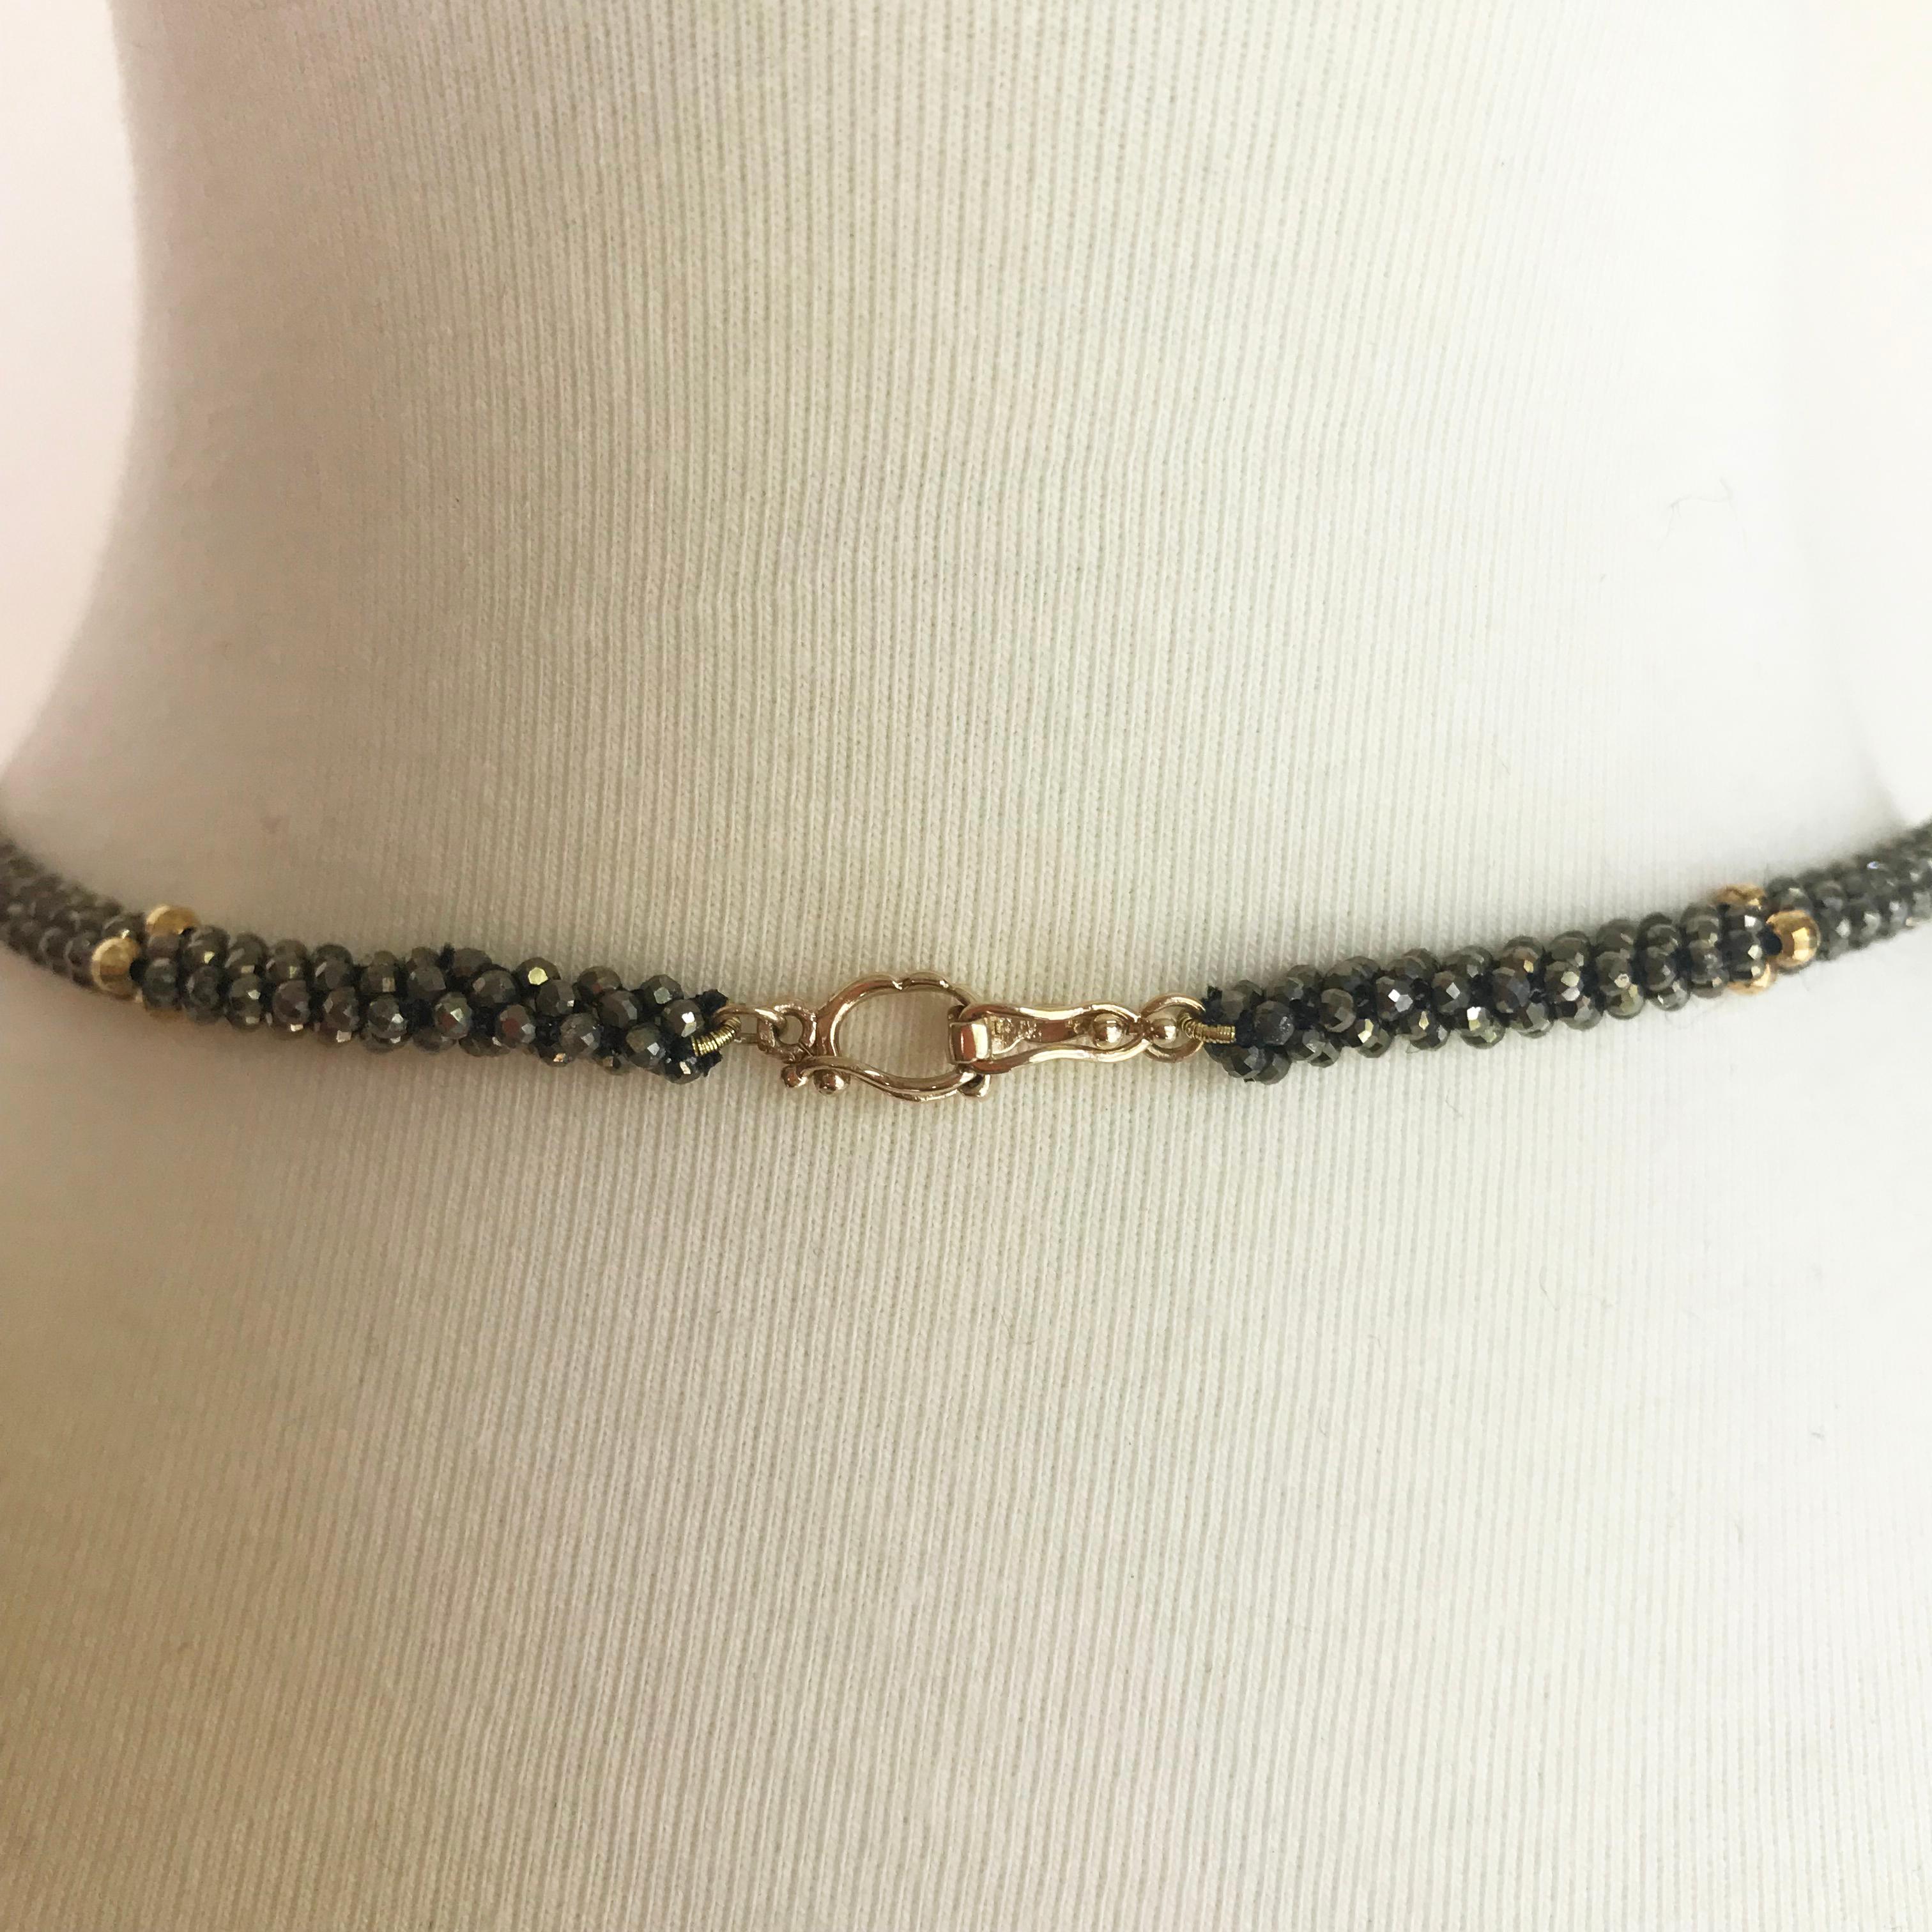 Marina J Black Spinel Woven Rope Necklace with Vintage Watch & 14K Gold Clasp 5